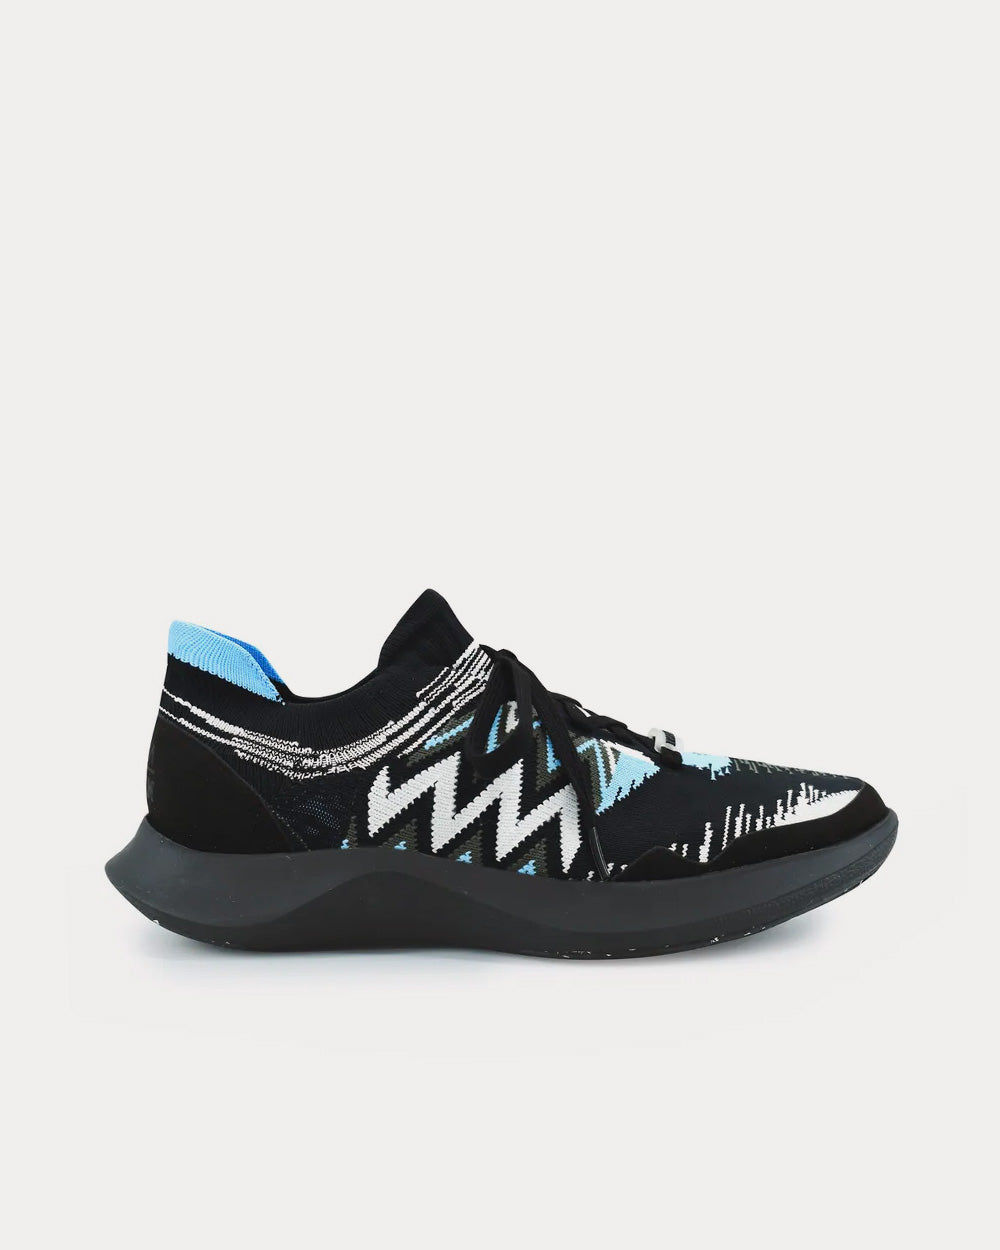 Missoni x ACBC - Fly Blue / Black Low Top Sneakers